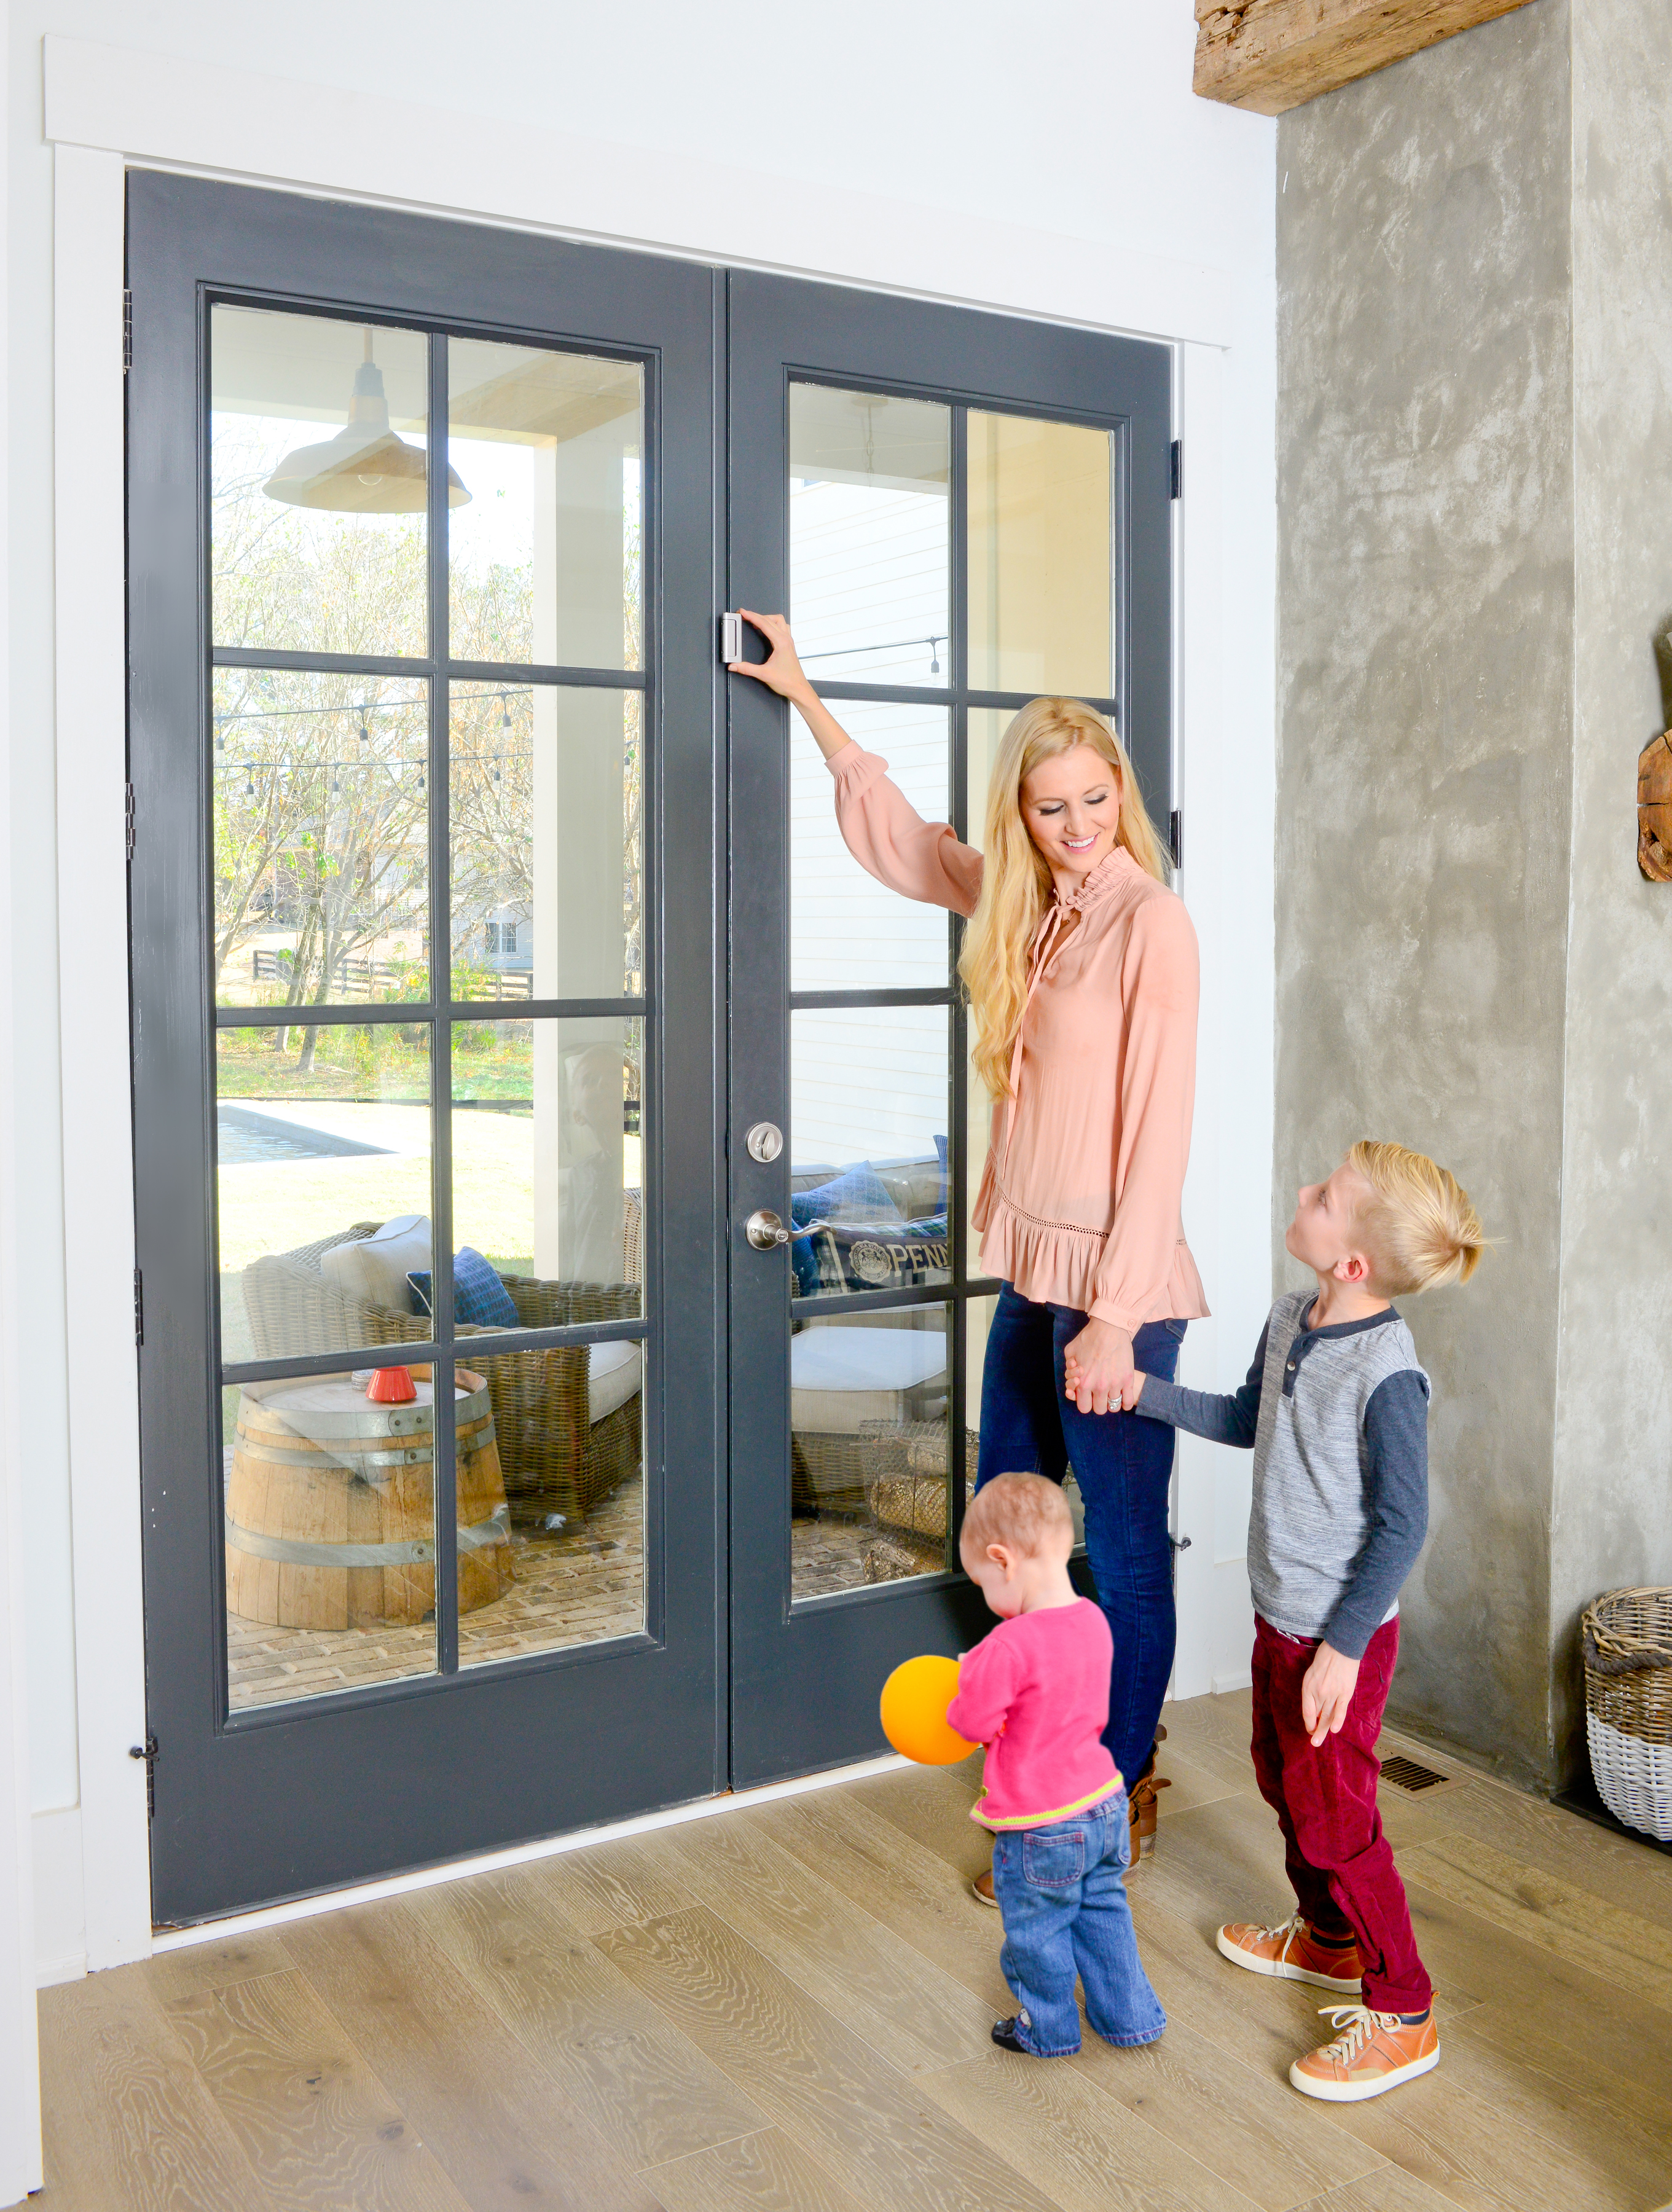 The Door Guardian Childproof Products Home Safety Cardinal Gates